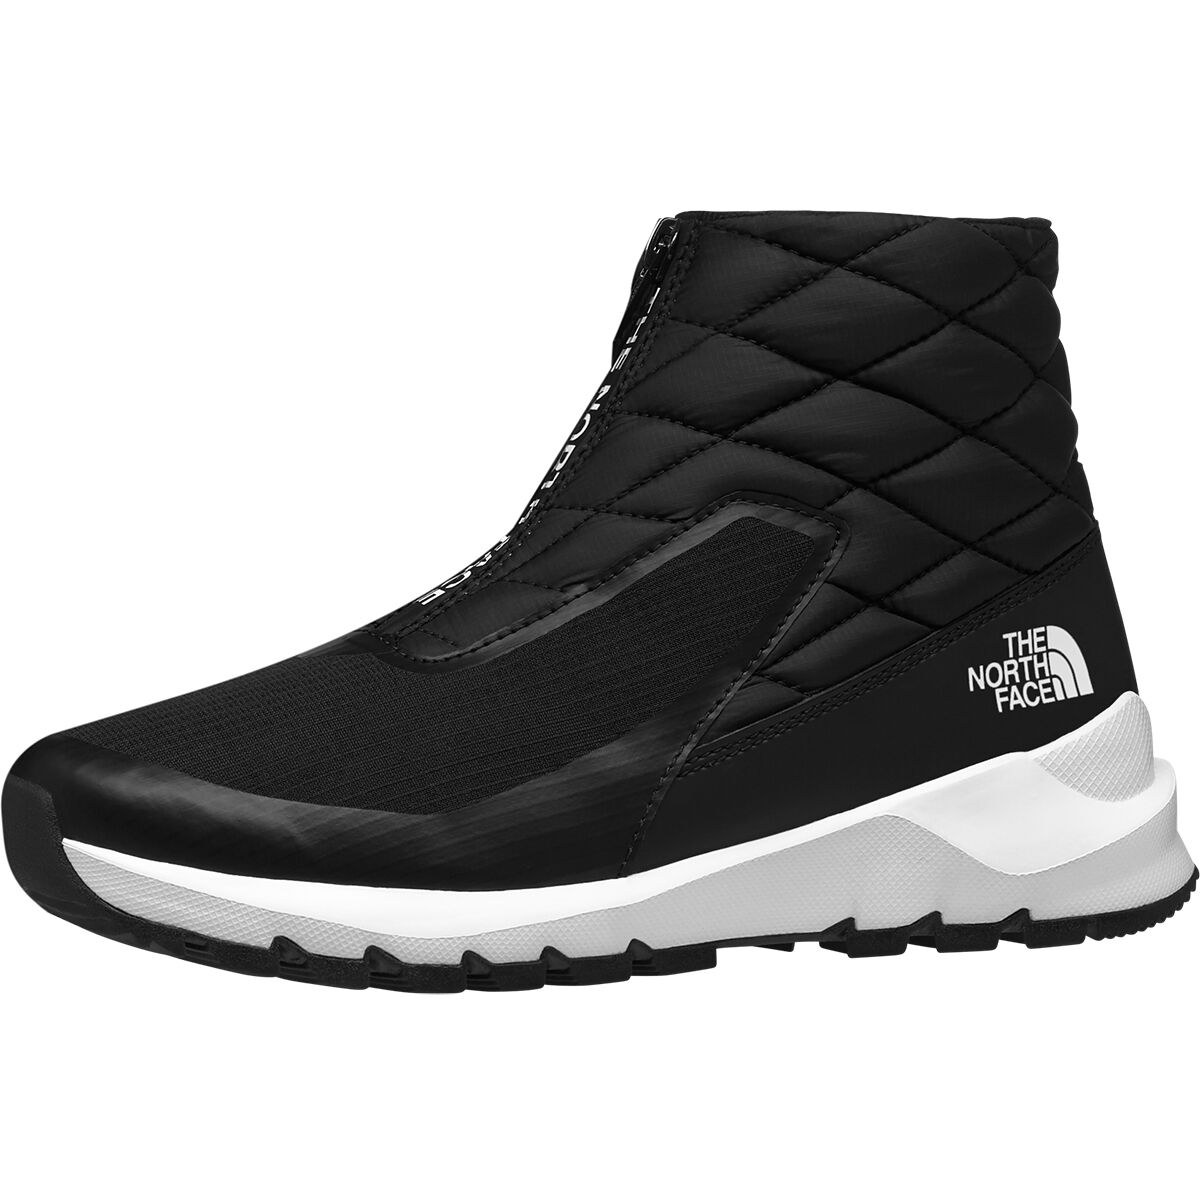 The North Face ThermoBall Progressive Zip Bootie - Women's - Footwear